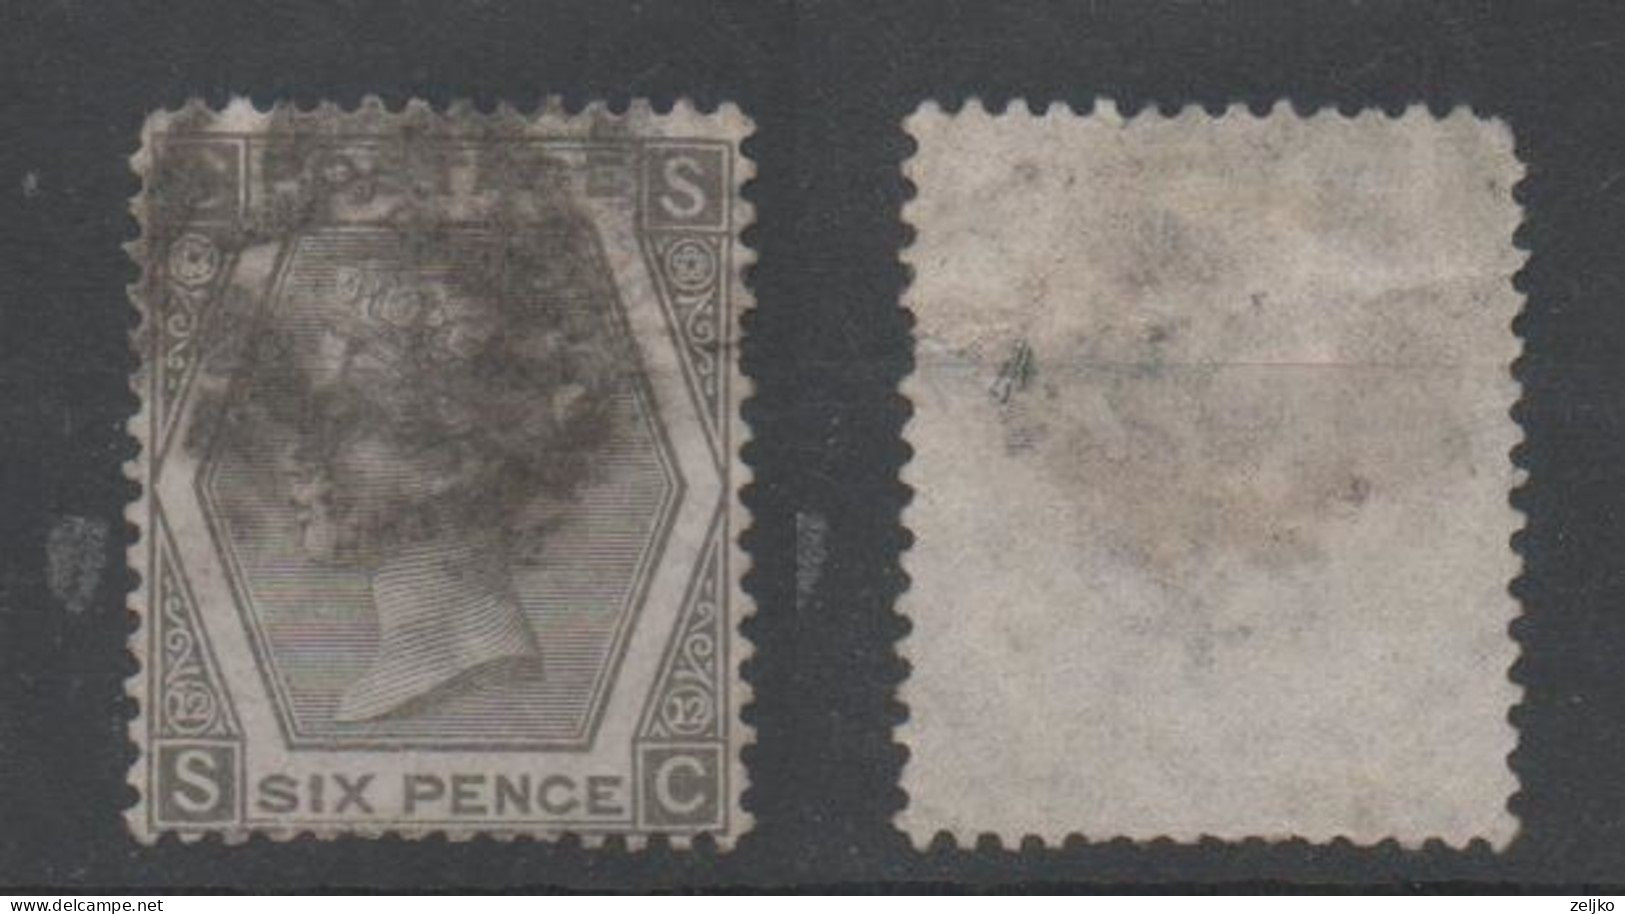 UK, GB, Great Britain, Used, 1872, Michel 39 - Used Stamps